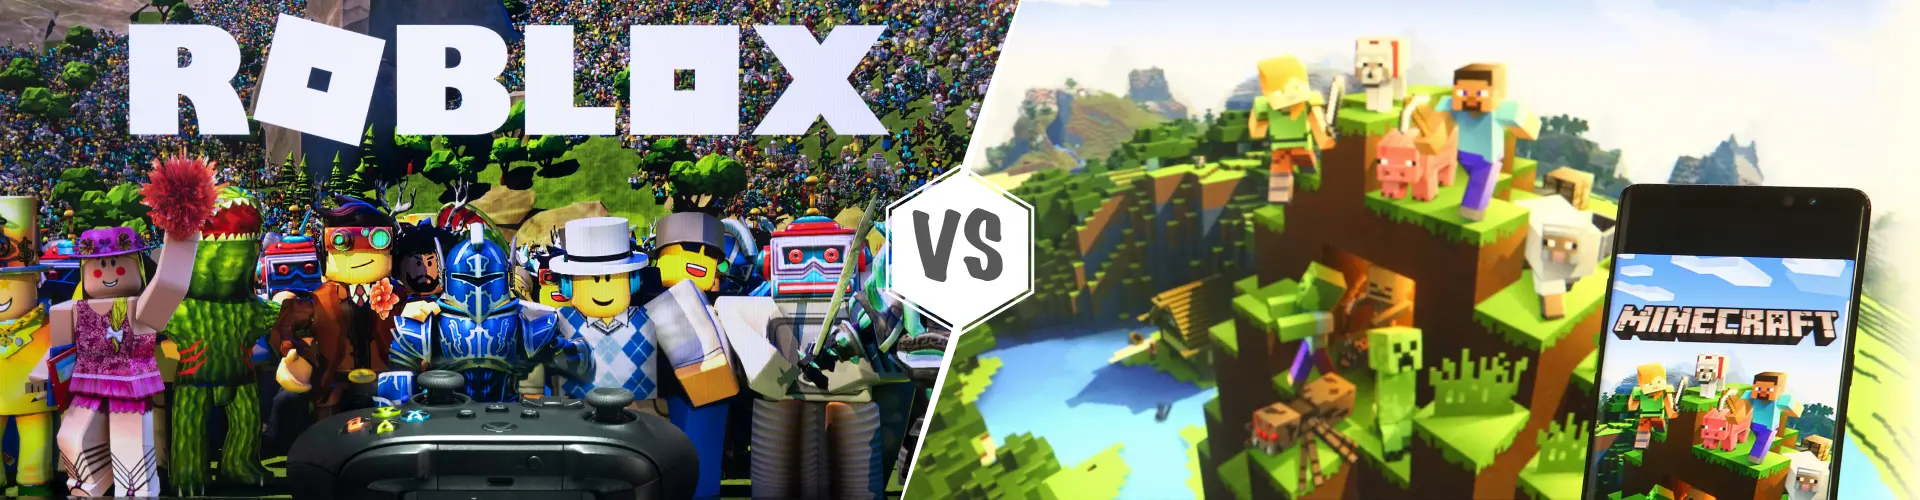 roblox vs minecraft- which is better